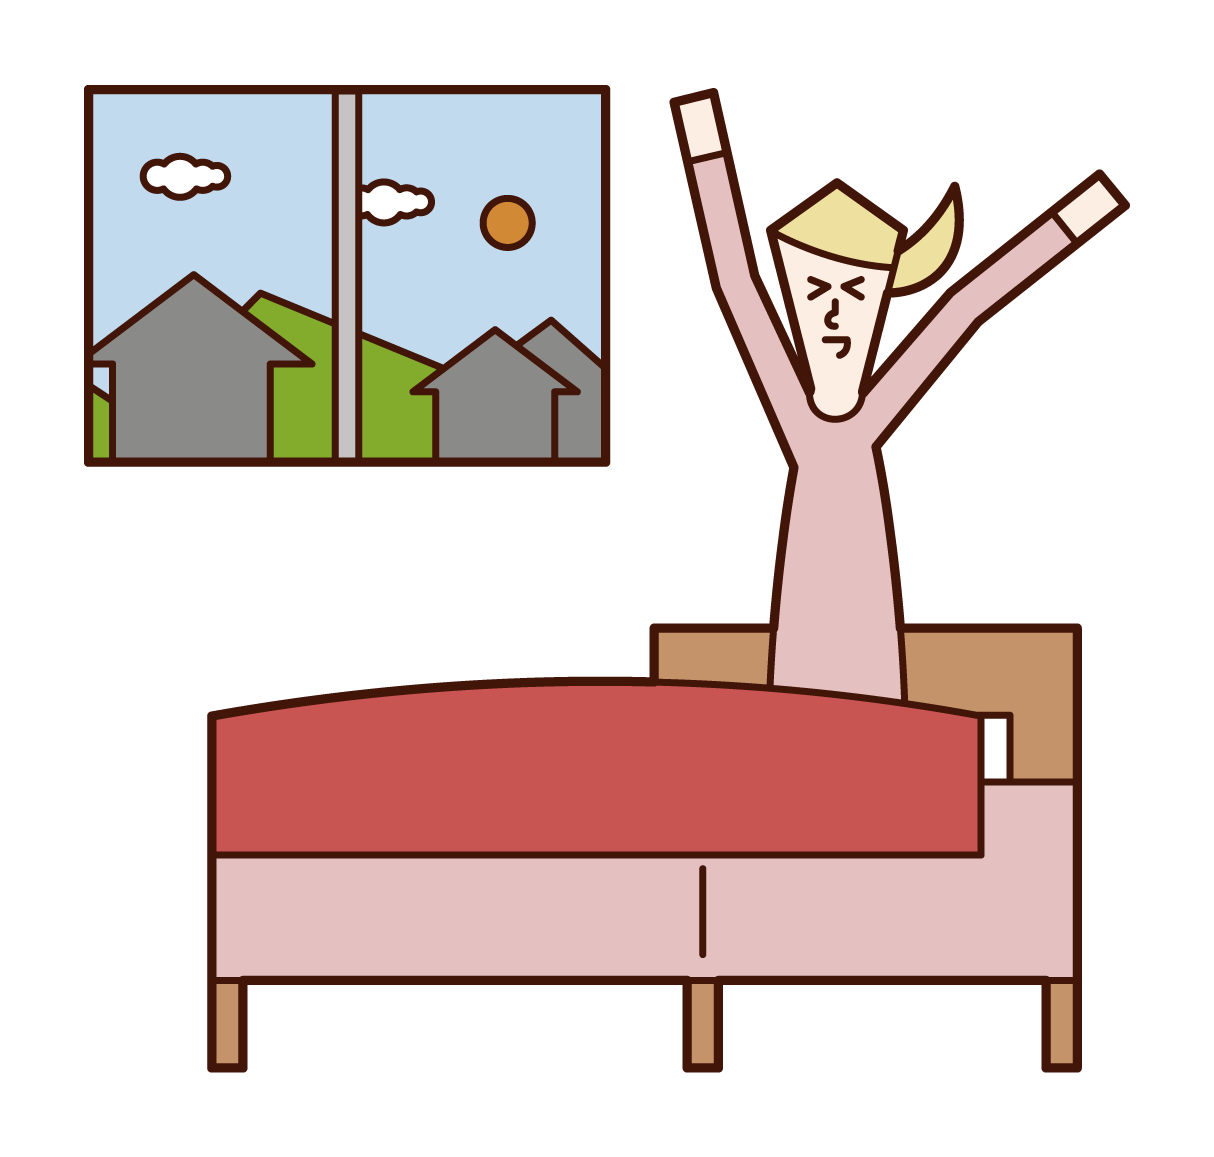 Illustration of a woman who wakes up